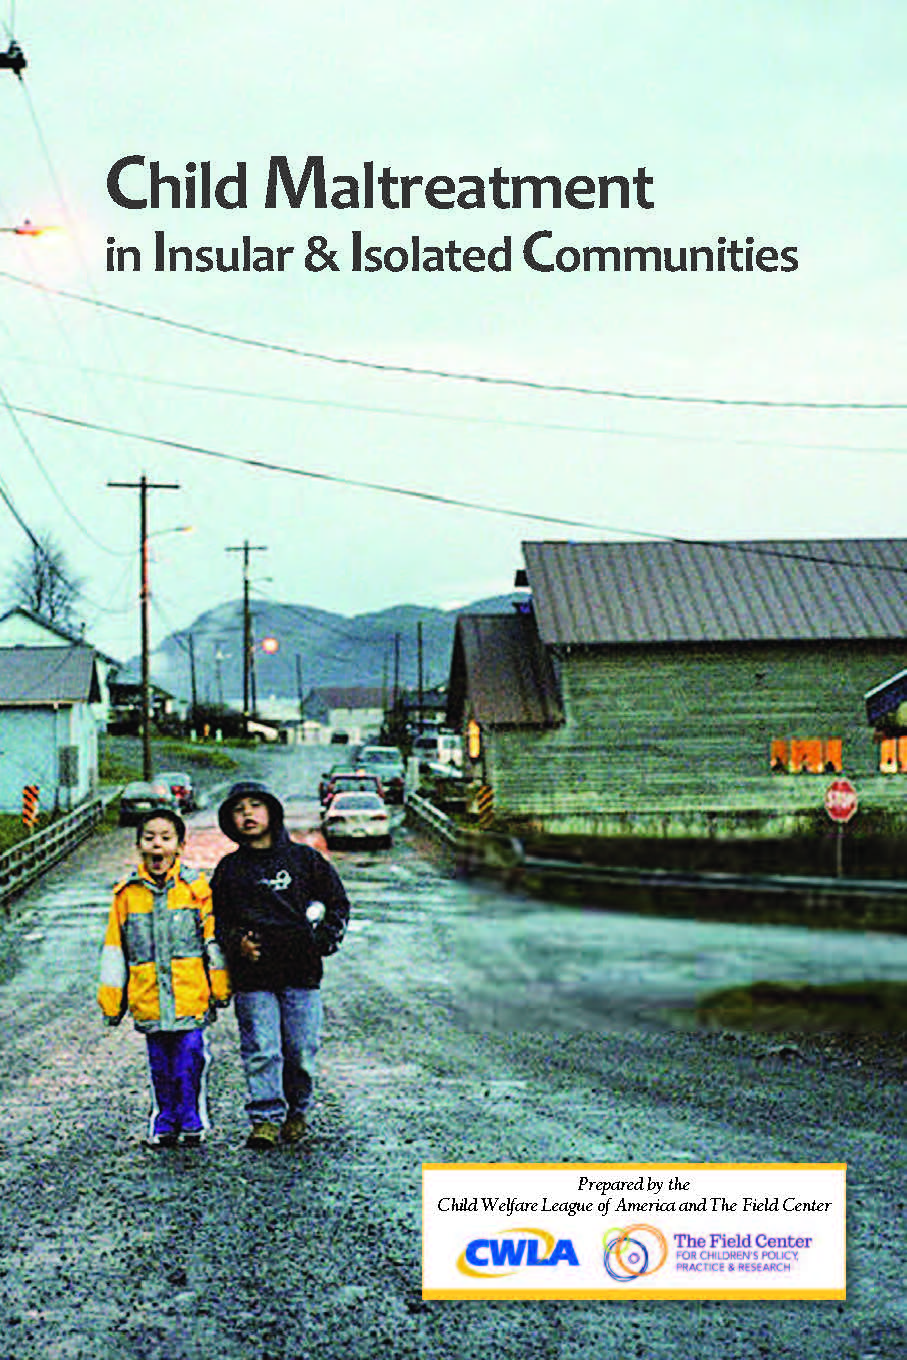 Child Maltreatment in Insular & Isolated Communities